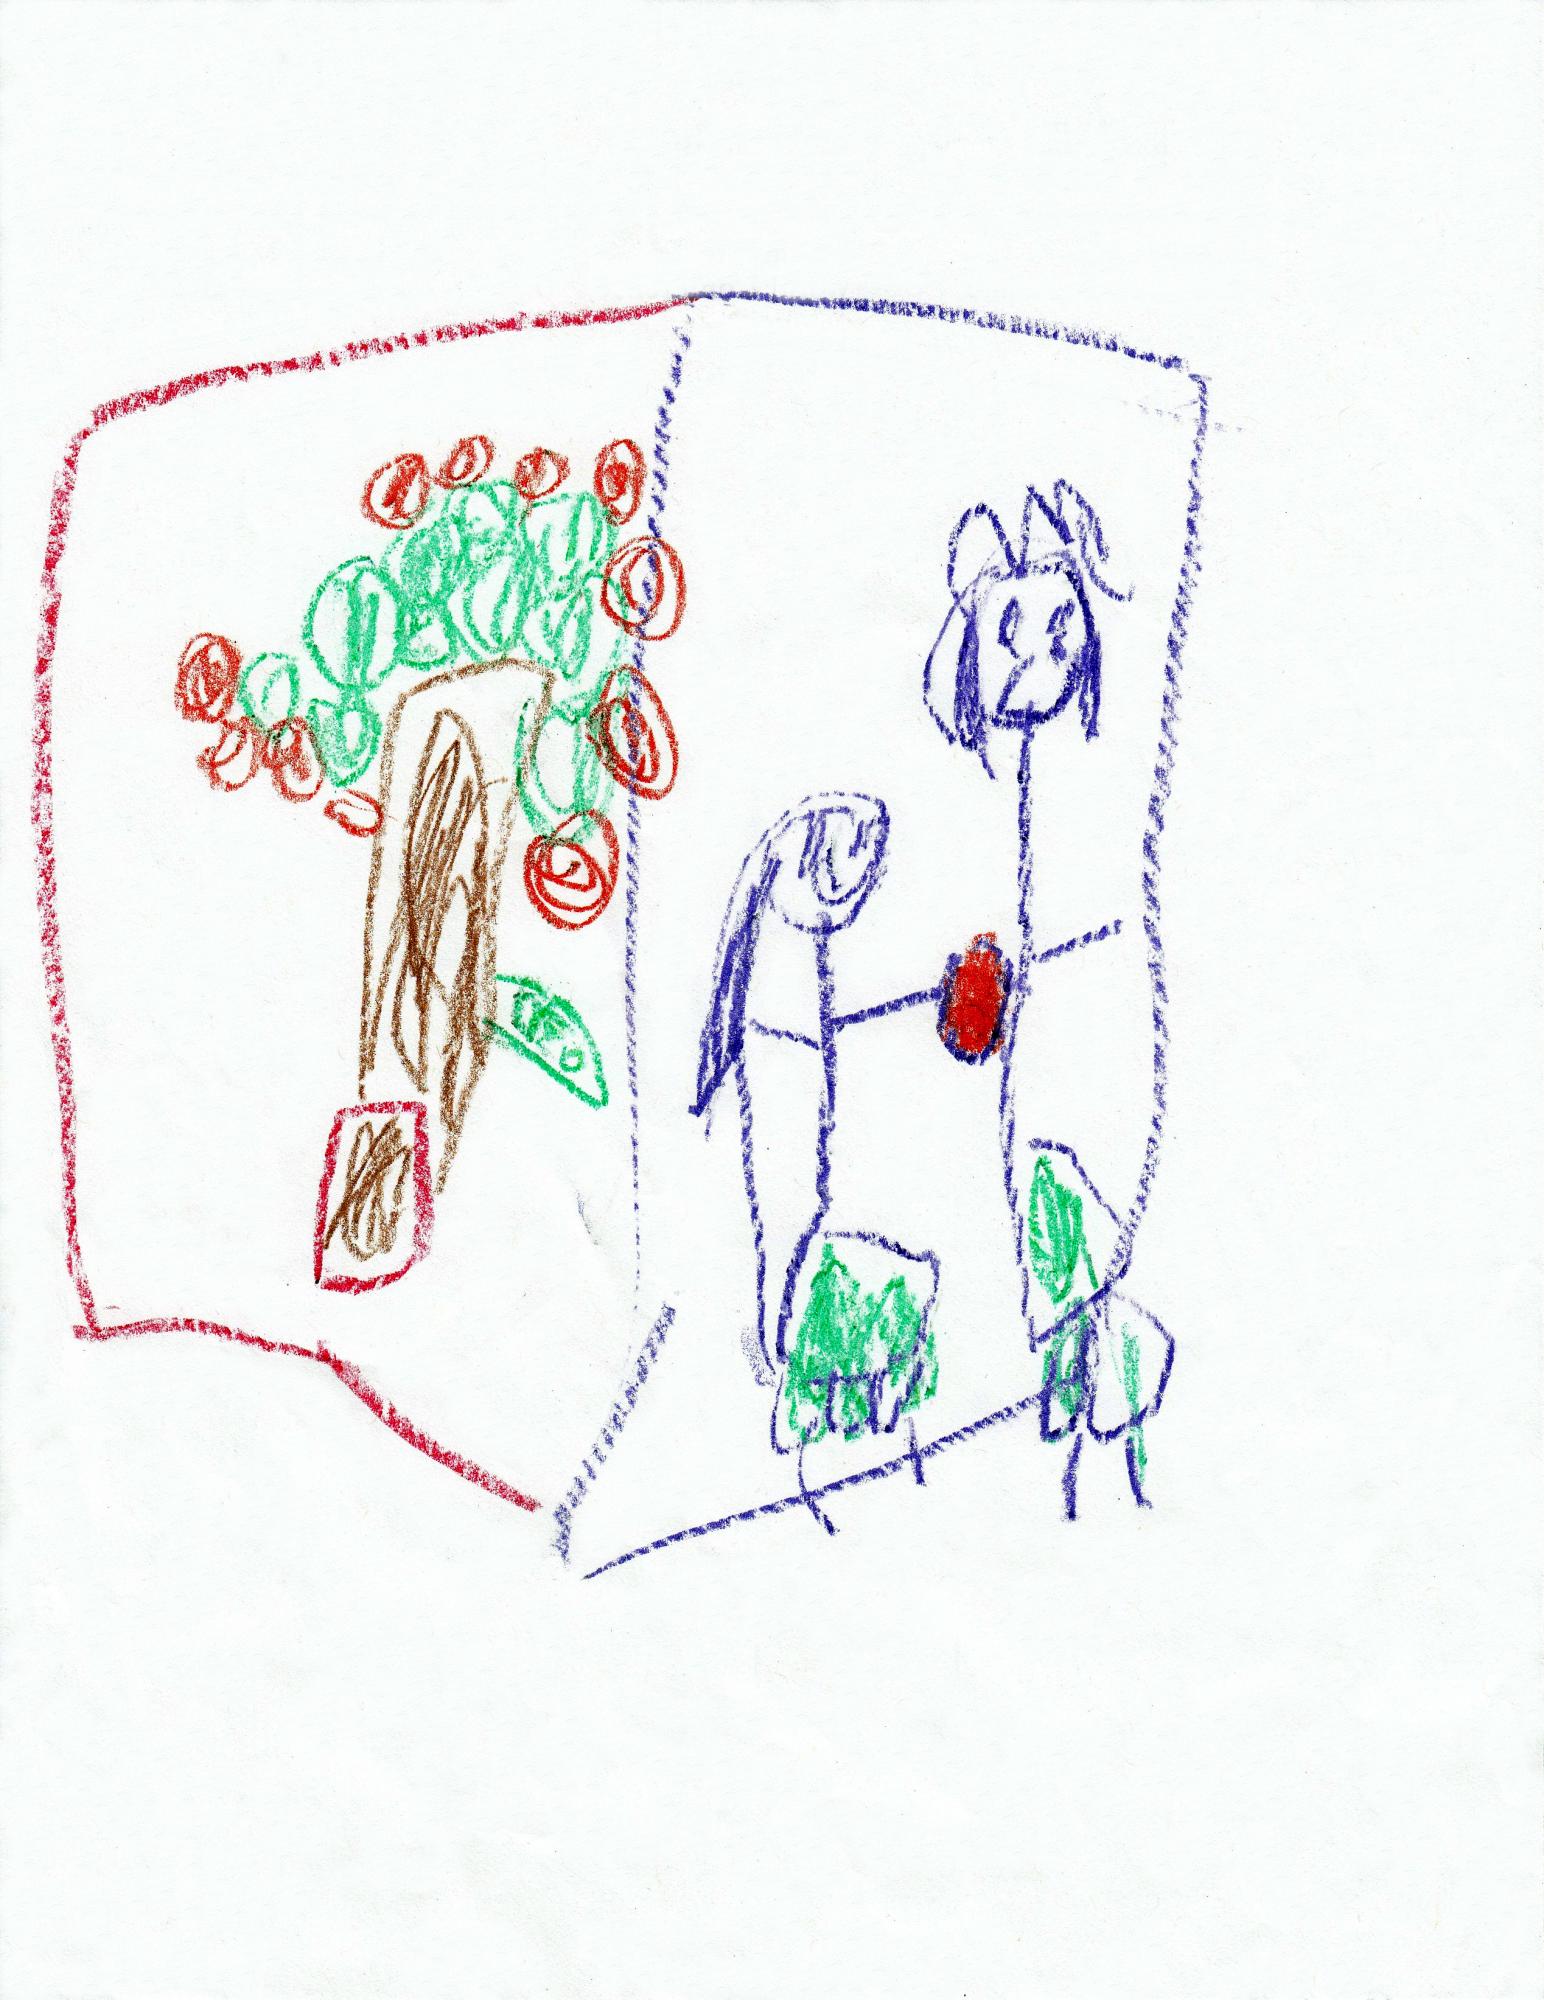 Ruth Cain (4) and Patrick Cain (6) drew a photo of their favourite Bible story. They attend Grace Mennonite Brethren Church, Waterloo, Ontario, Canada.